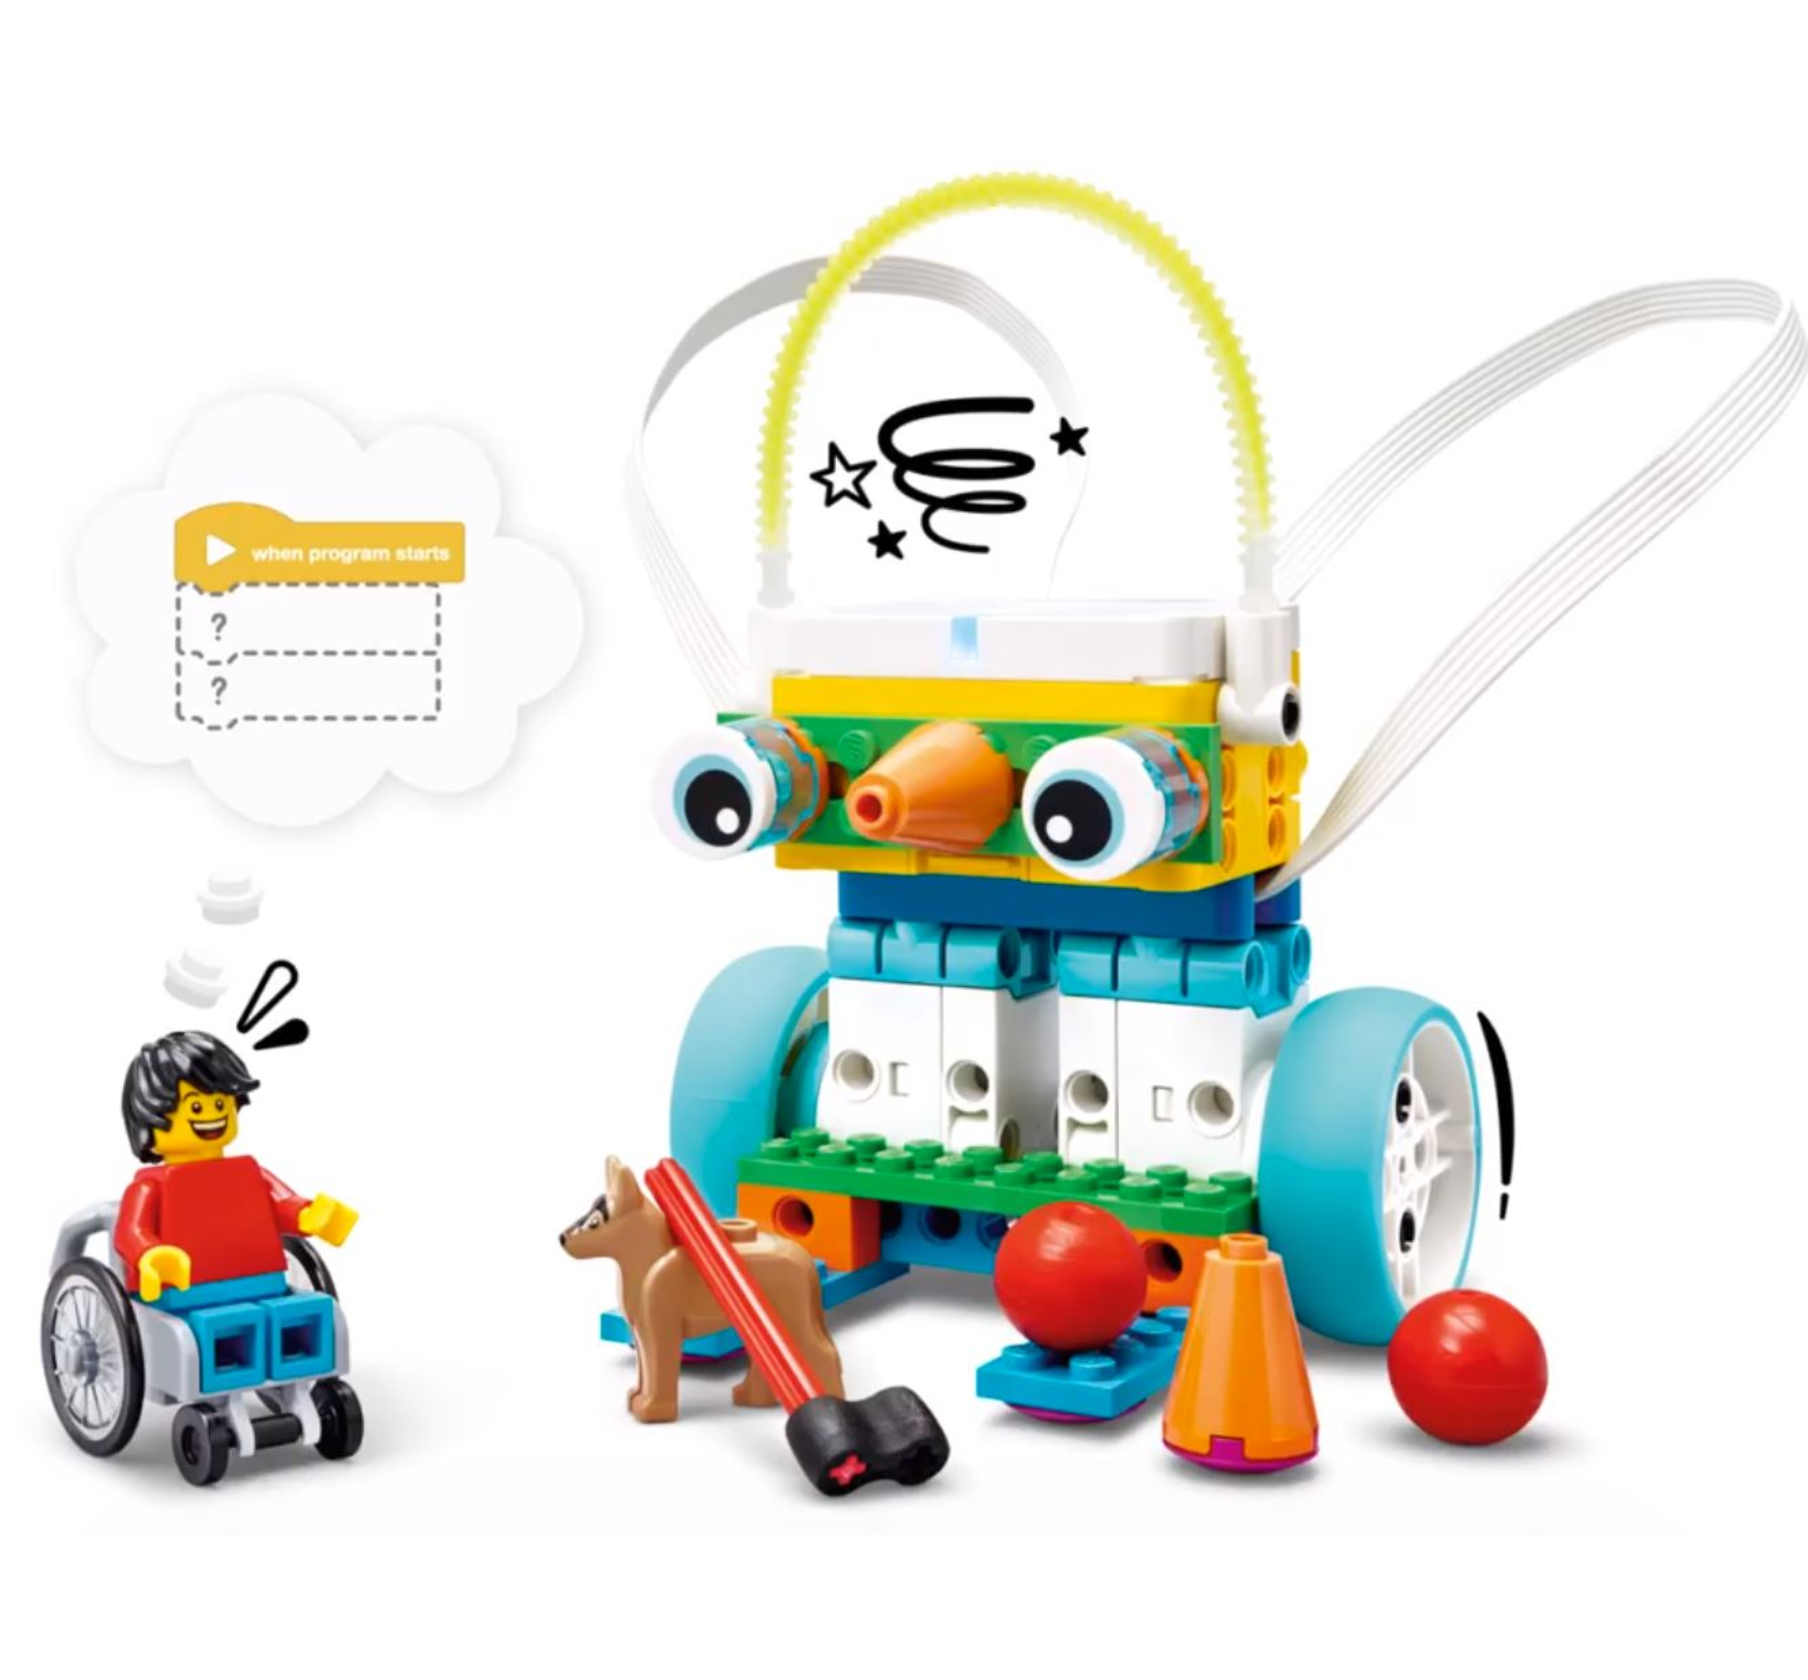 LEGO Robot with big eyes and a boy in a wheelchair